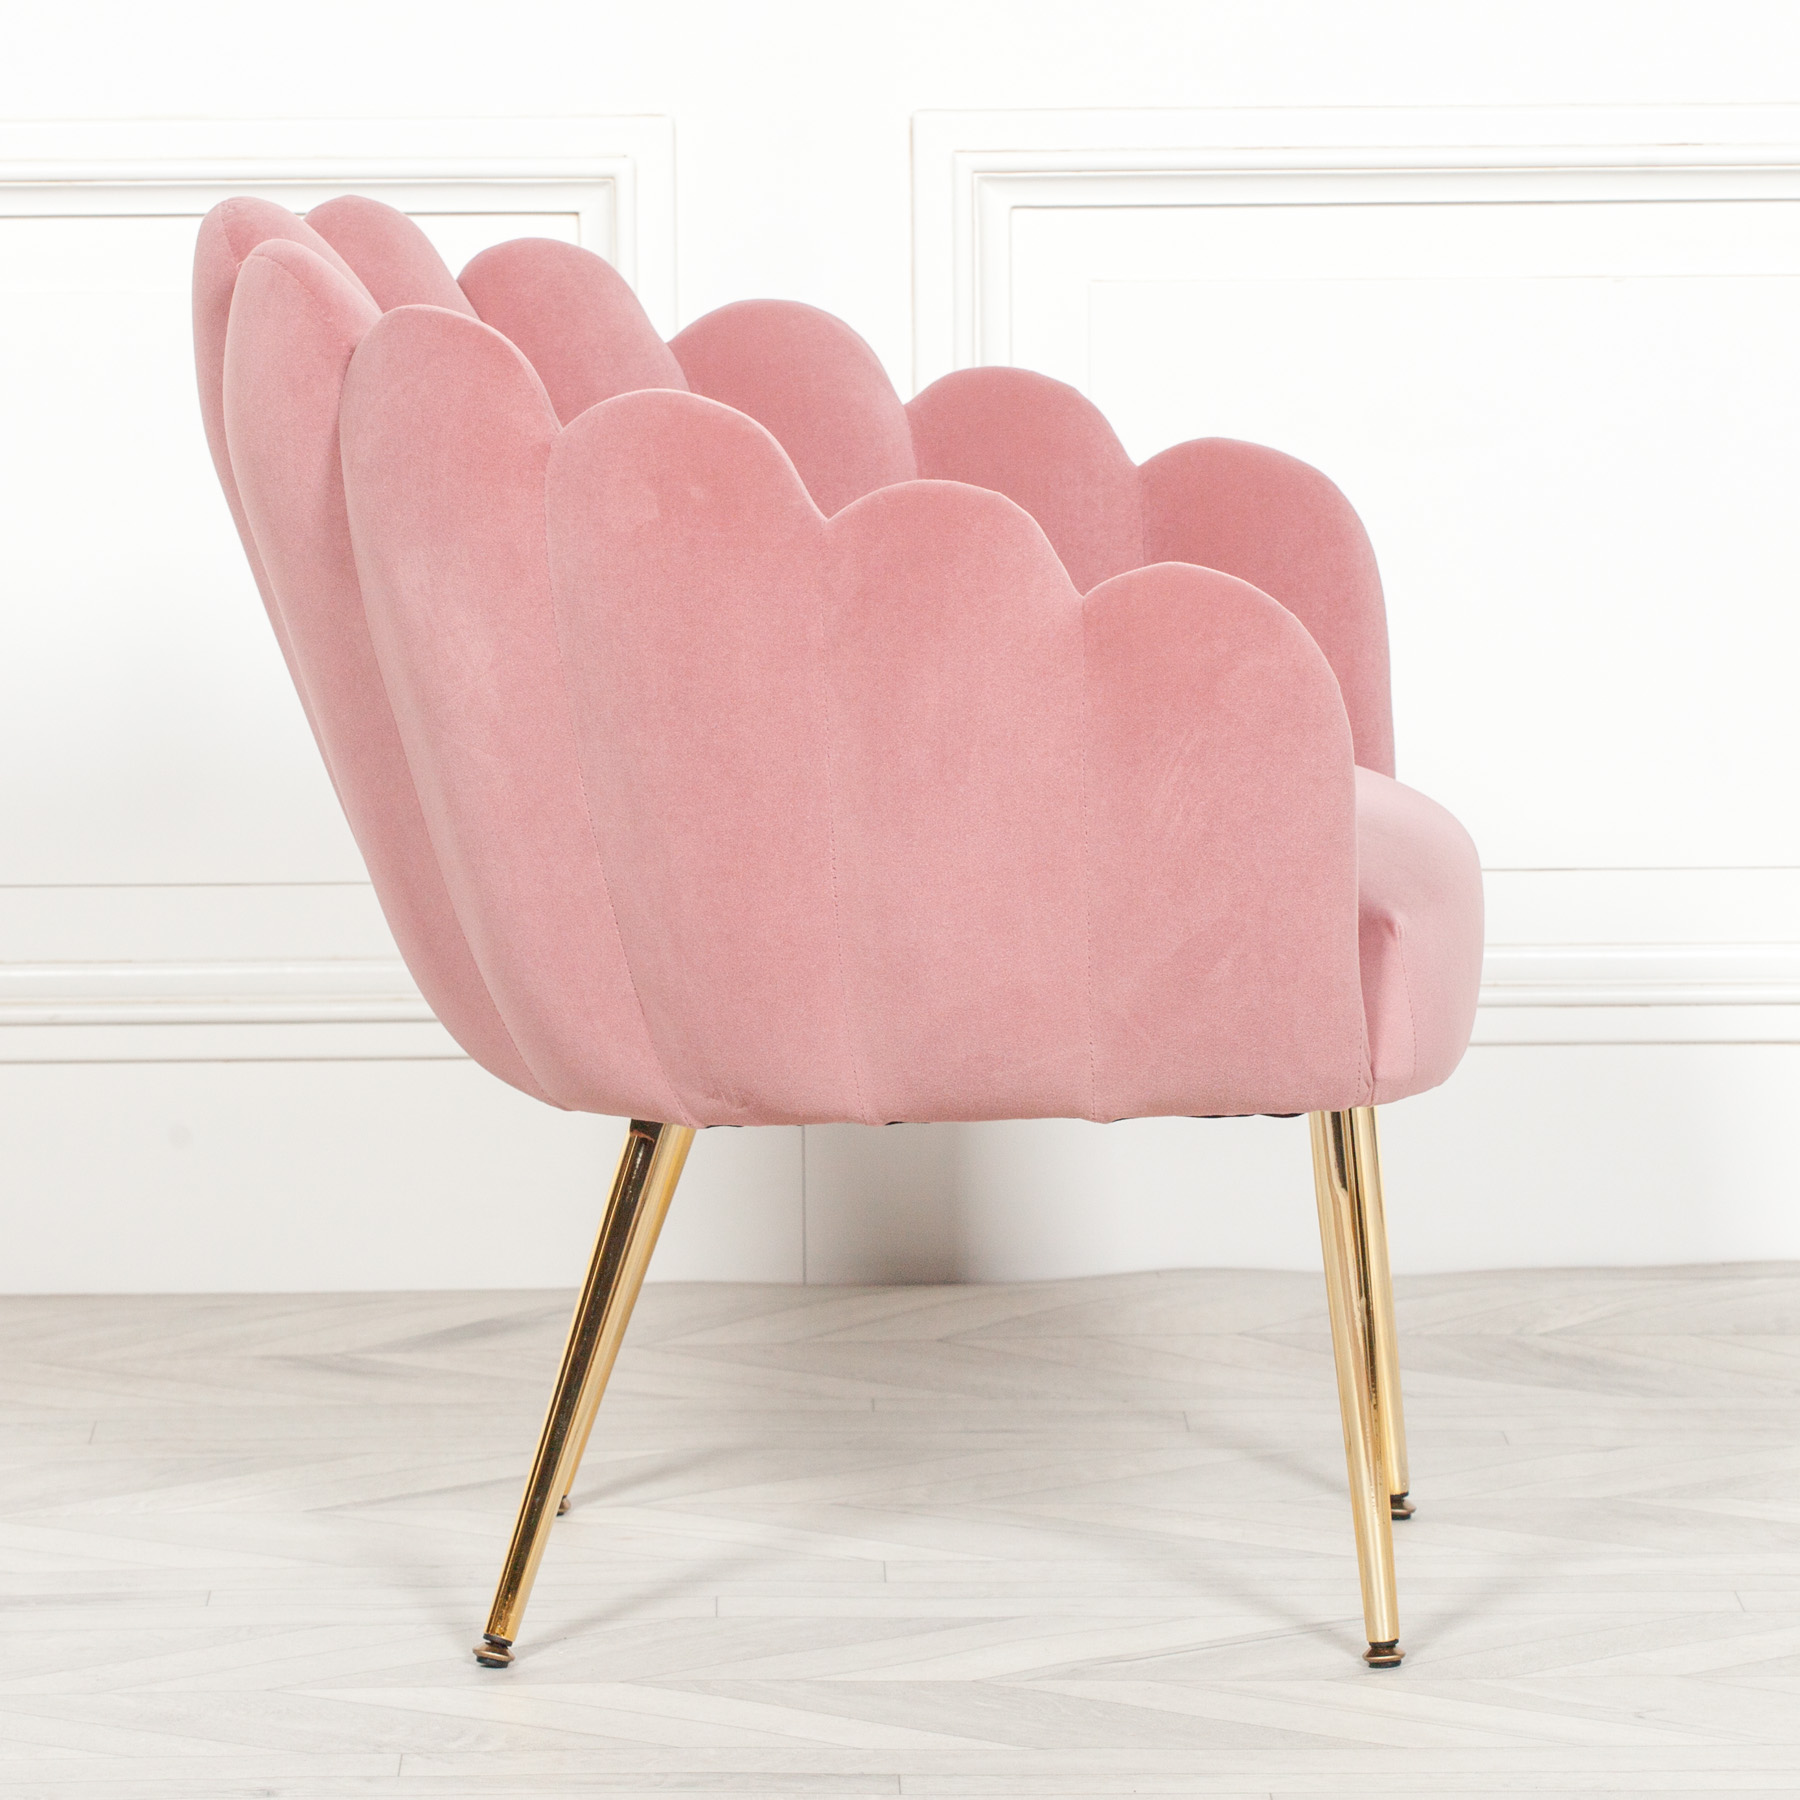 Deco Pink Dining / Bedroom Chair Maison Reproductions